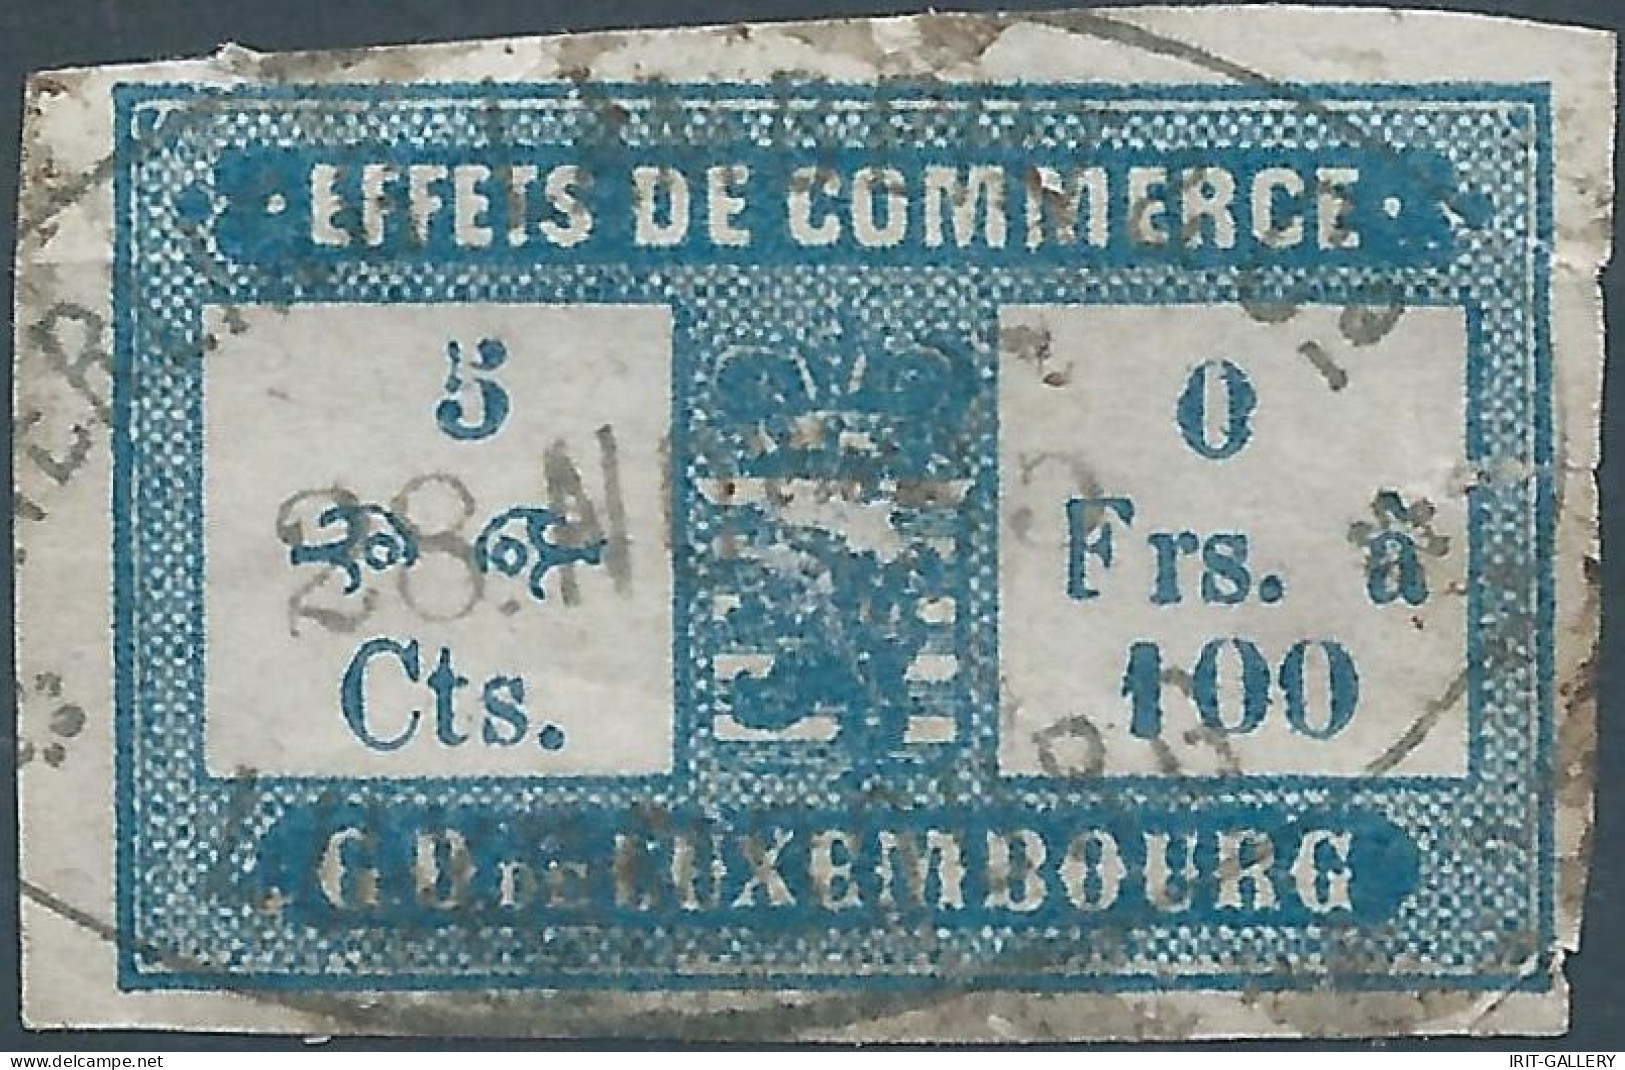 Lussemburgo - G.D De LUXEMBOURG,1885 Revenue Stamp Tax Fiscal , EFFETS DE COMMERCE-TRADING EFFECTS , Very Old - Fiscale Zegels